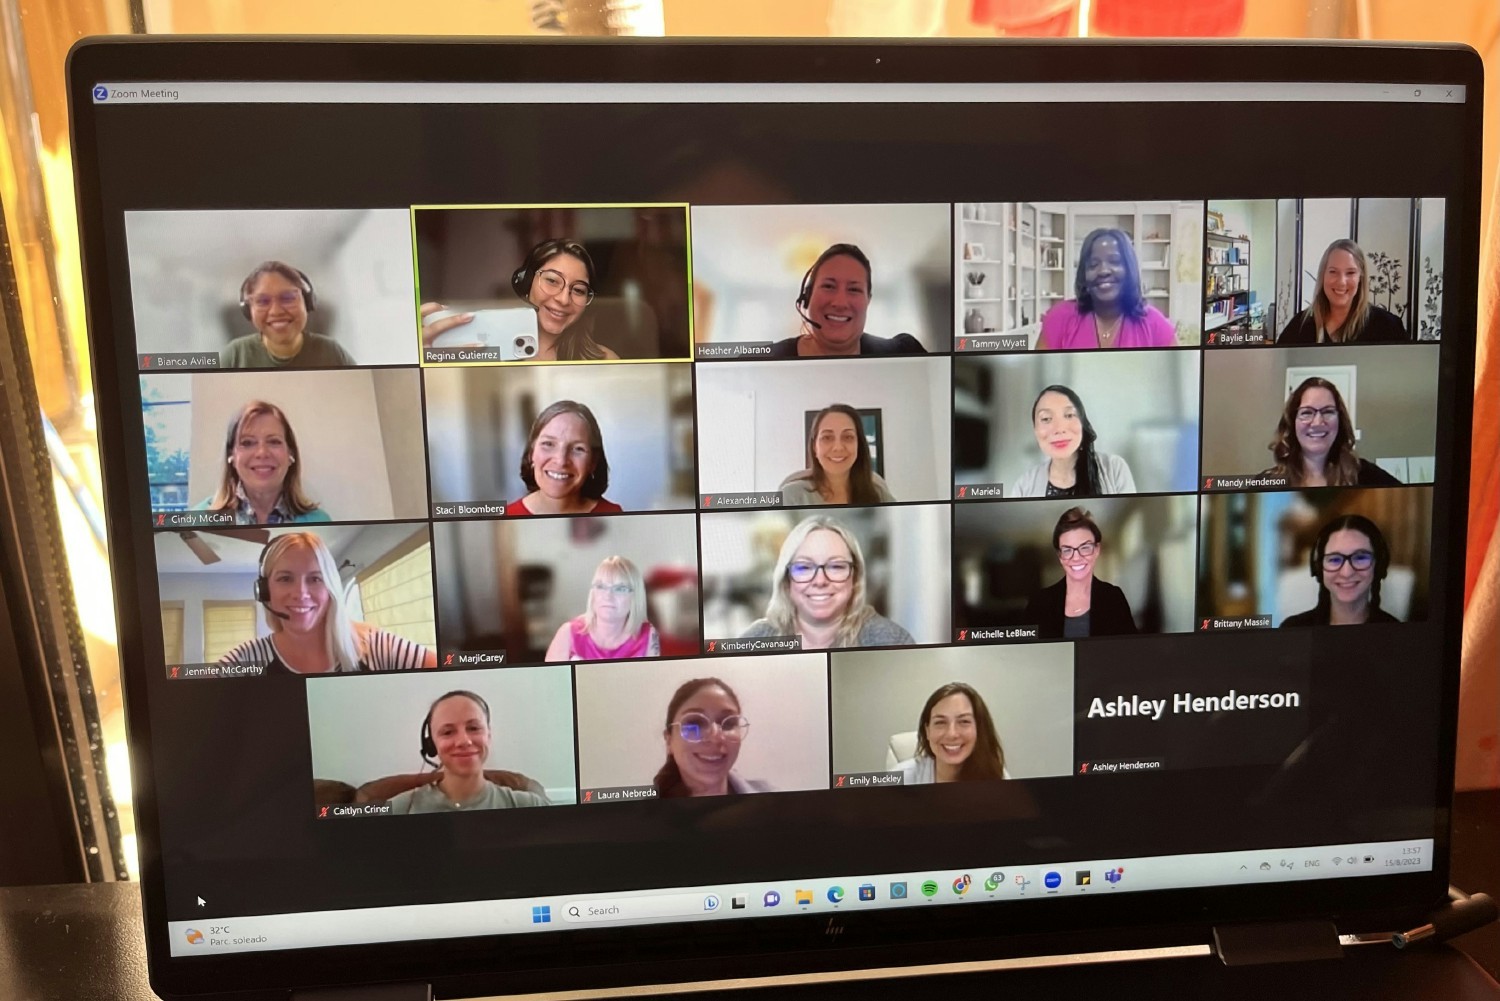 When you are a virtual team, you have to think of fun ways to get together! 